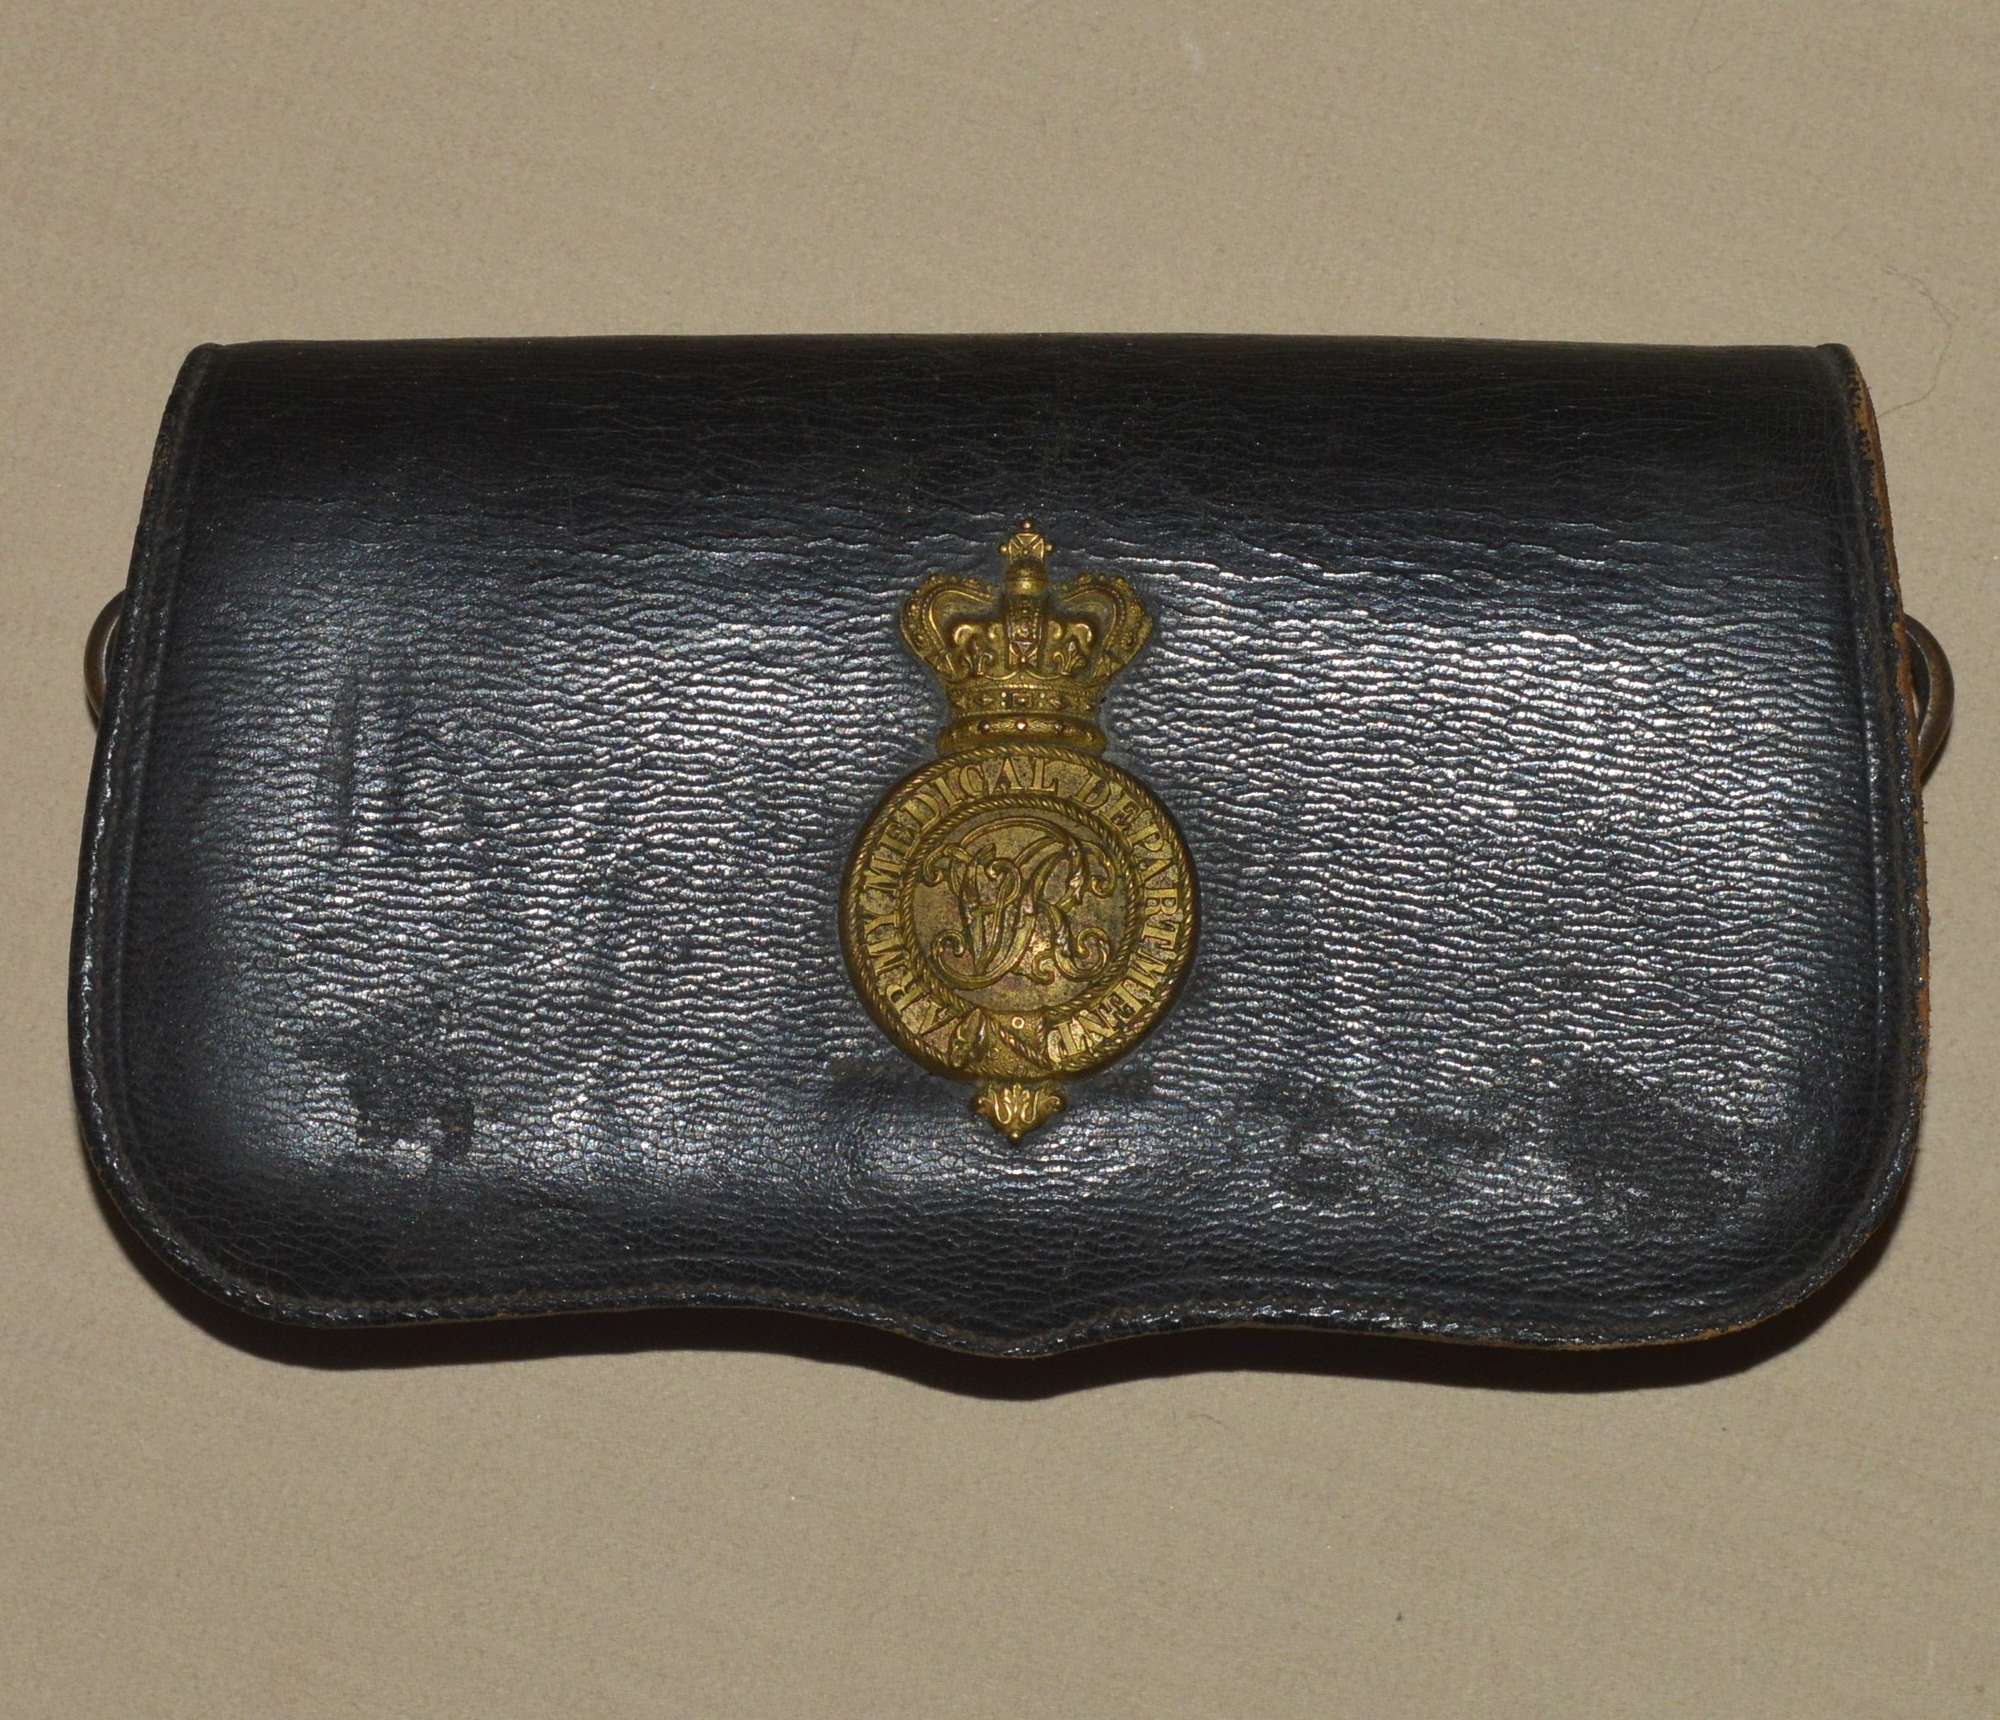 ﻿British Victorian Medical Officer’s Undress Pouch